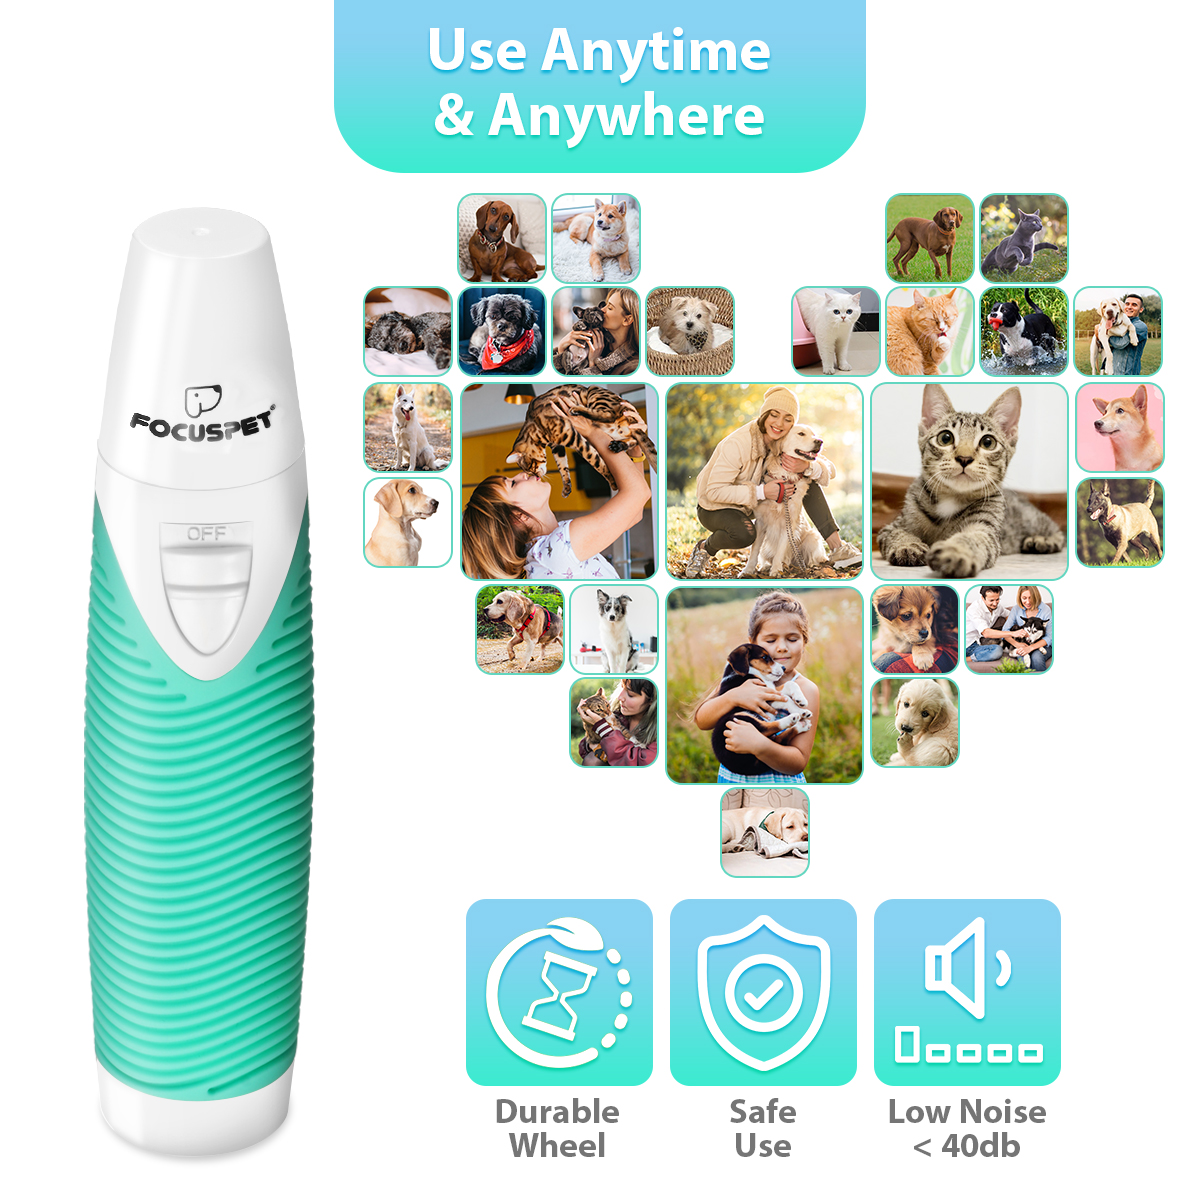 Focuspet-Electric-Pet-Cat-Dog-Toe-Nail-Grinder-File-Claws-Clipper-Grooming-Trimmer-Tools-Pet-Supplie-1935601-4